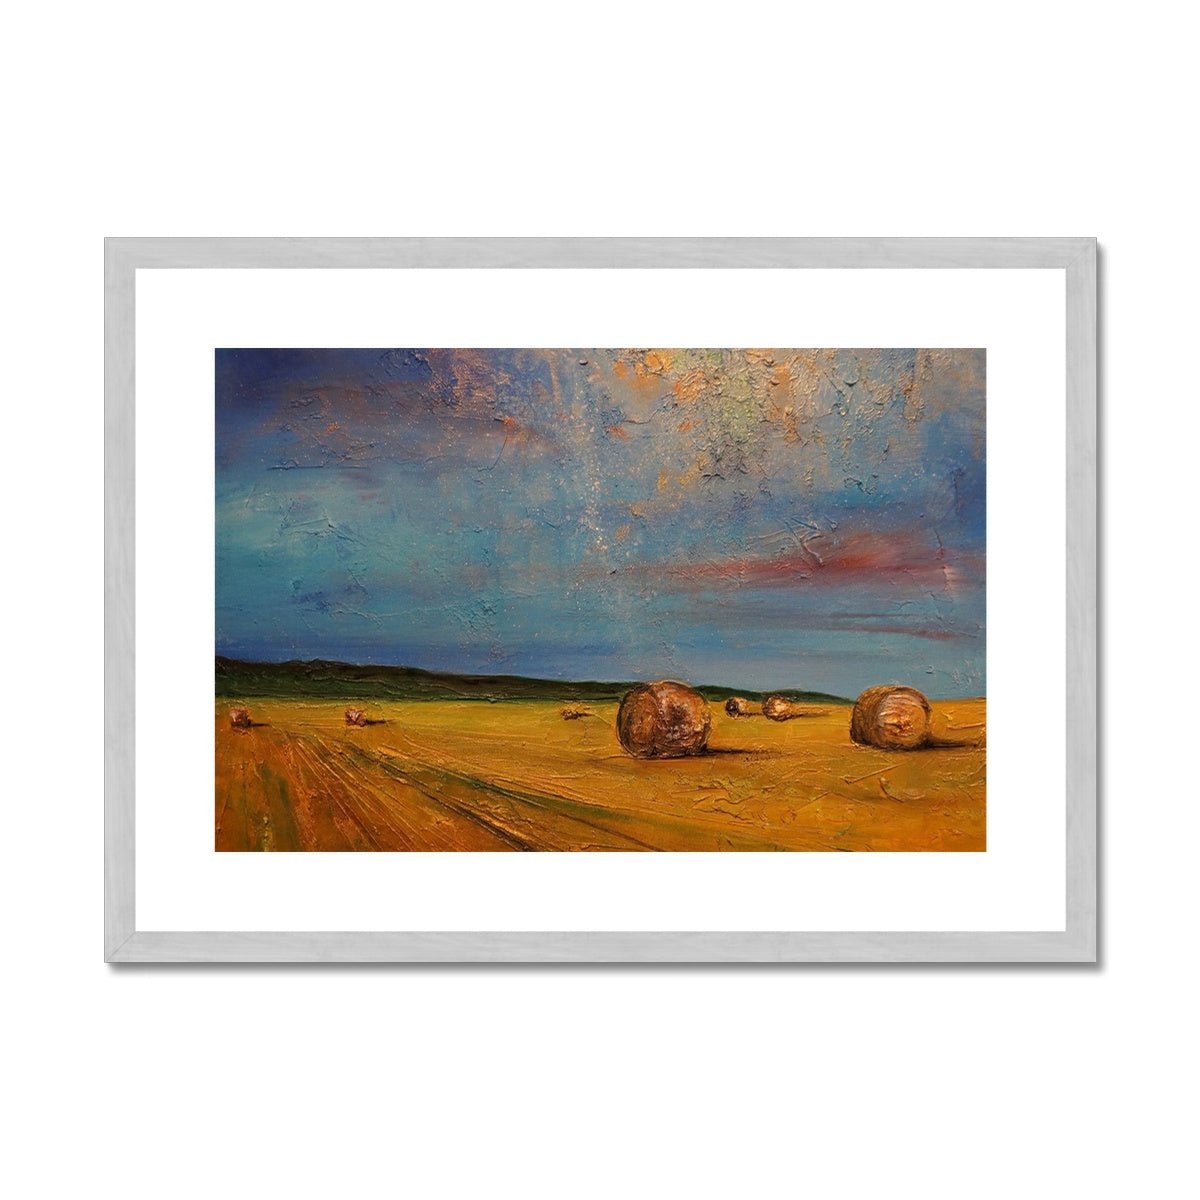 Hay Bales Painting | Antique Framed & Mounted Prints From Scotland-Antique Framed & Mounted Prints-Scottish Highlands & Lowlands Art Gallery-A2 Landscape-Silver Frame-Paintings, Prints, Homeware, Art Gifts From Scotland By Scottish Artist Kevin Hunter